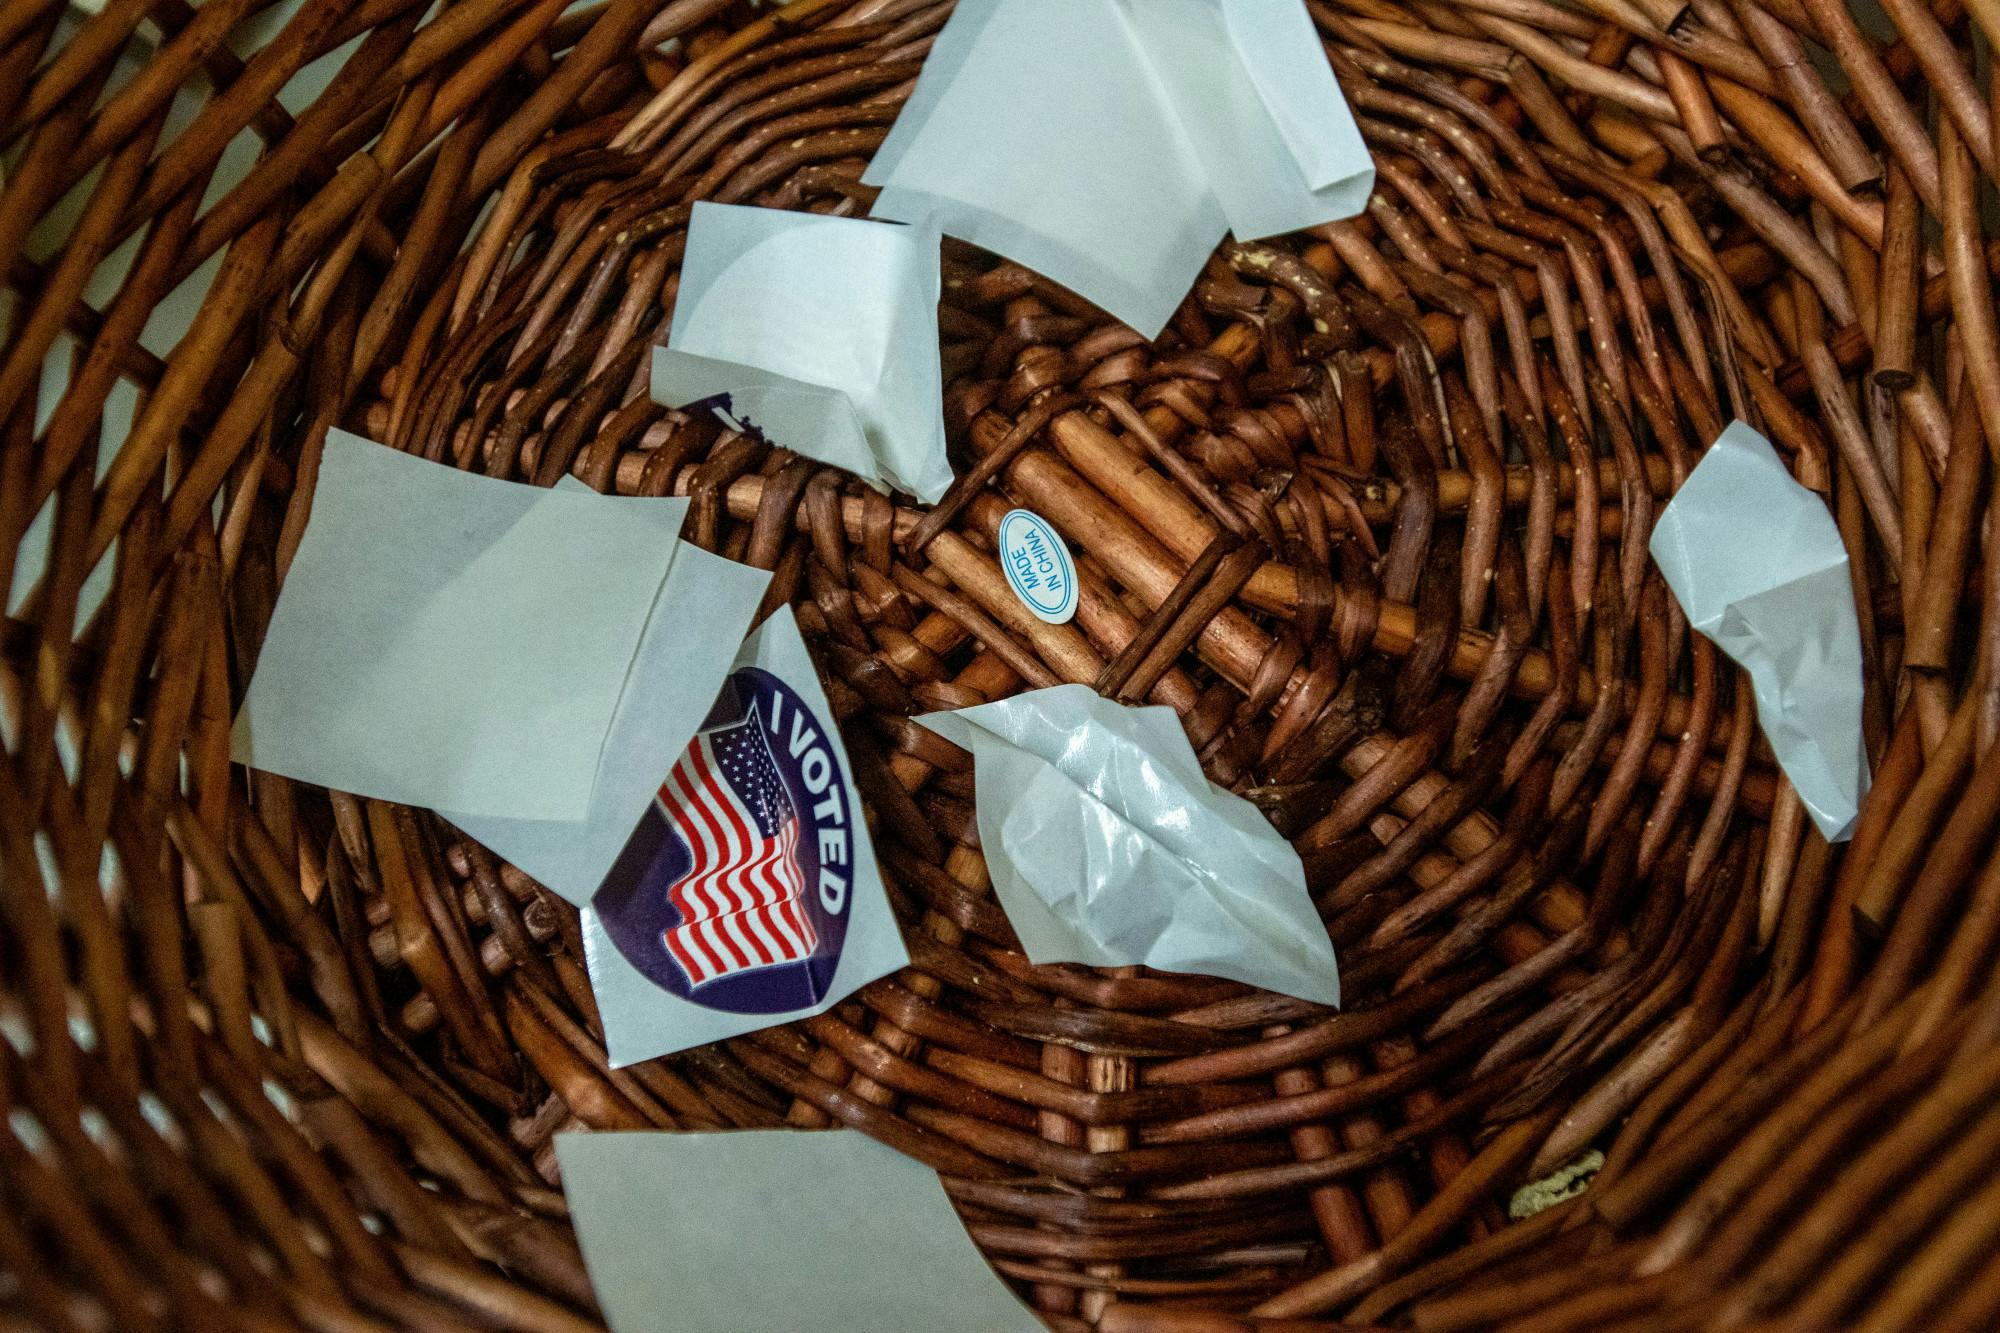 The backs of 'I voted' stickers in a waste basket.